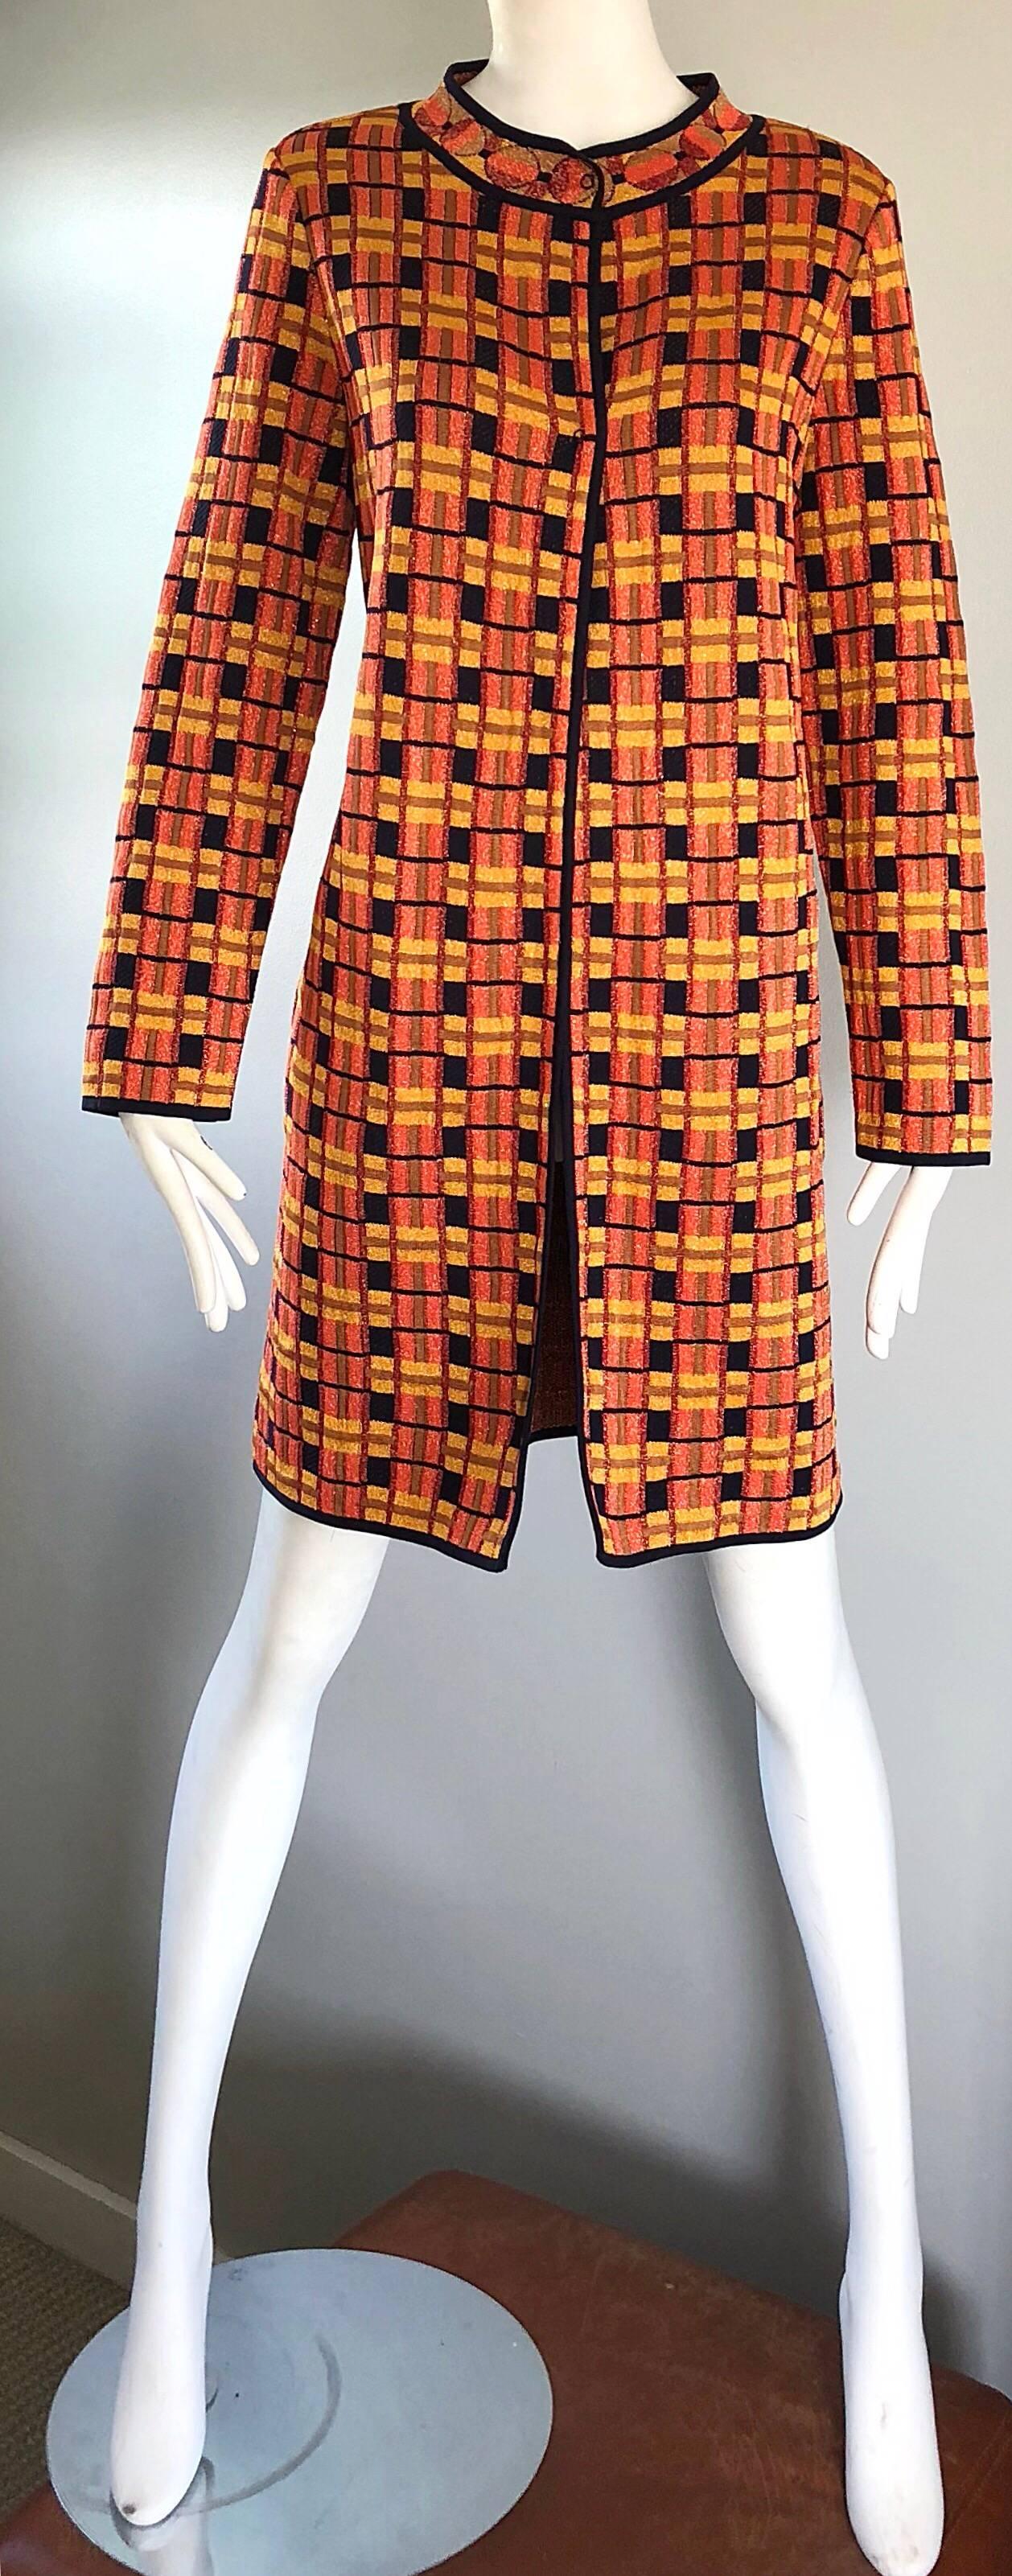 Chic 90s does 60s MISSONI burnt orange, yellow, brown and black metallic knee length knit vintage cardigan jacket! Mod 1960s style, with a modern update. Features pockets at each side of the hips. Slight metallic sheen gives off just the right